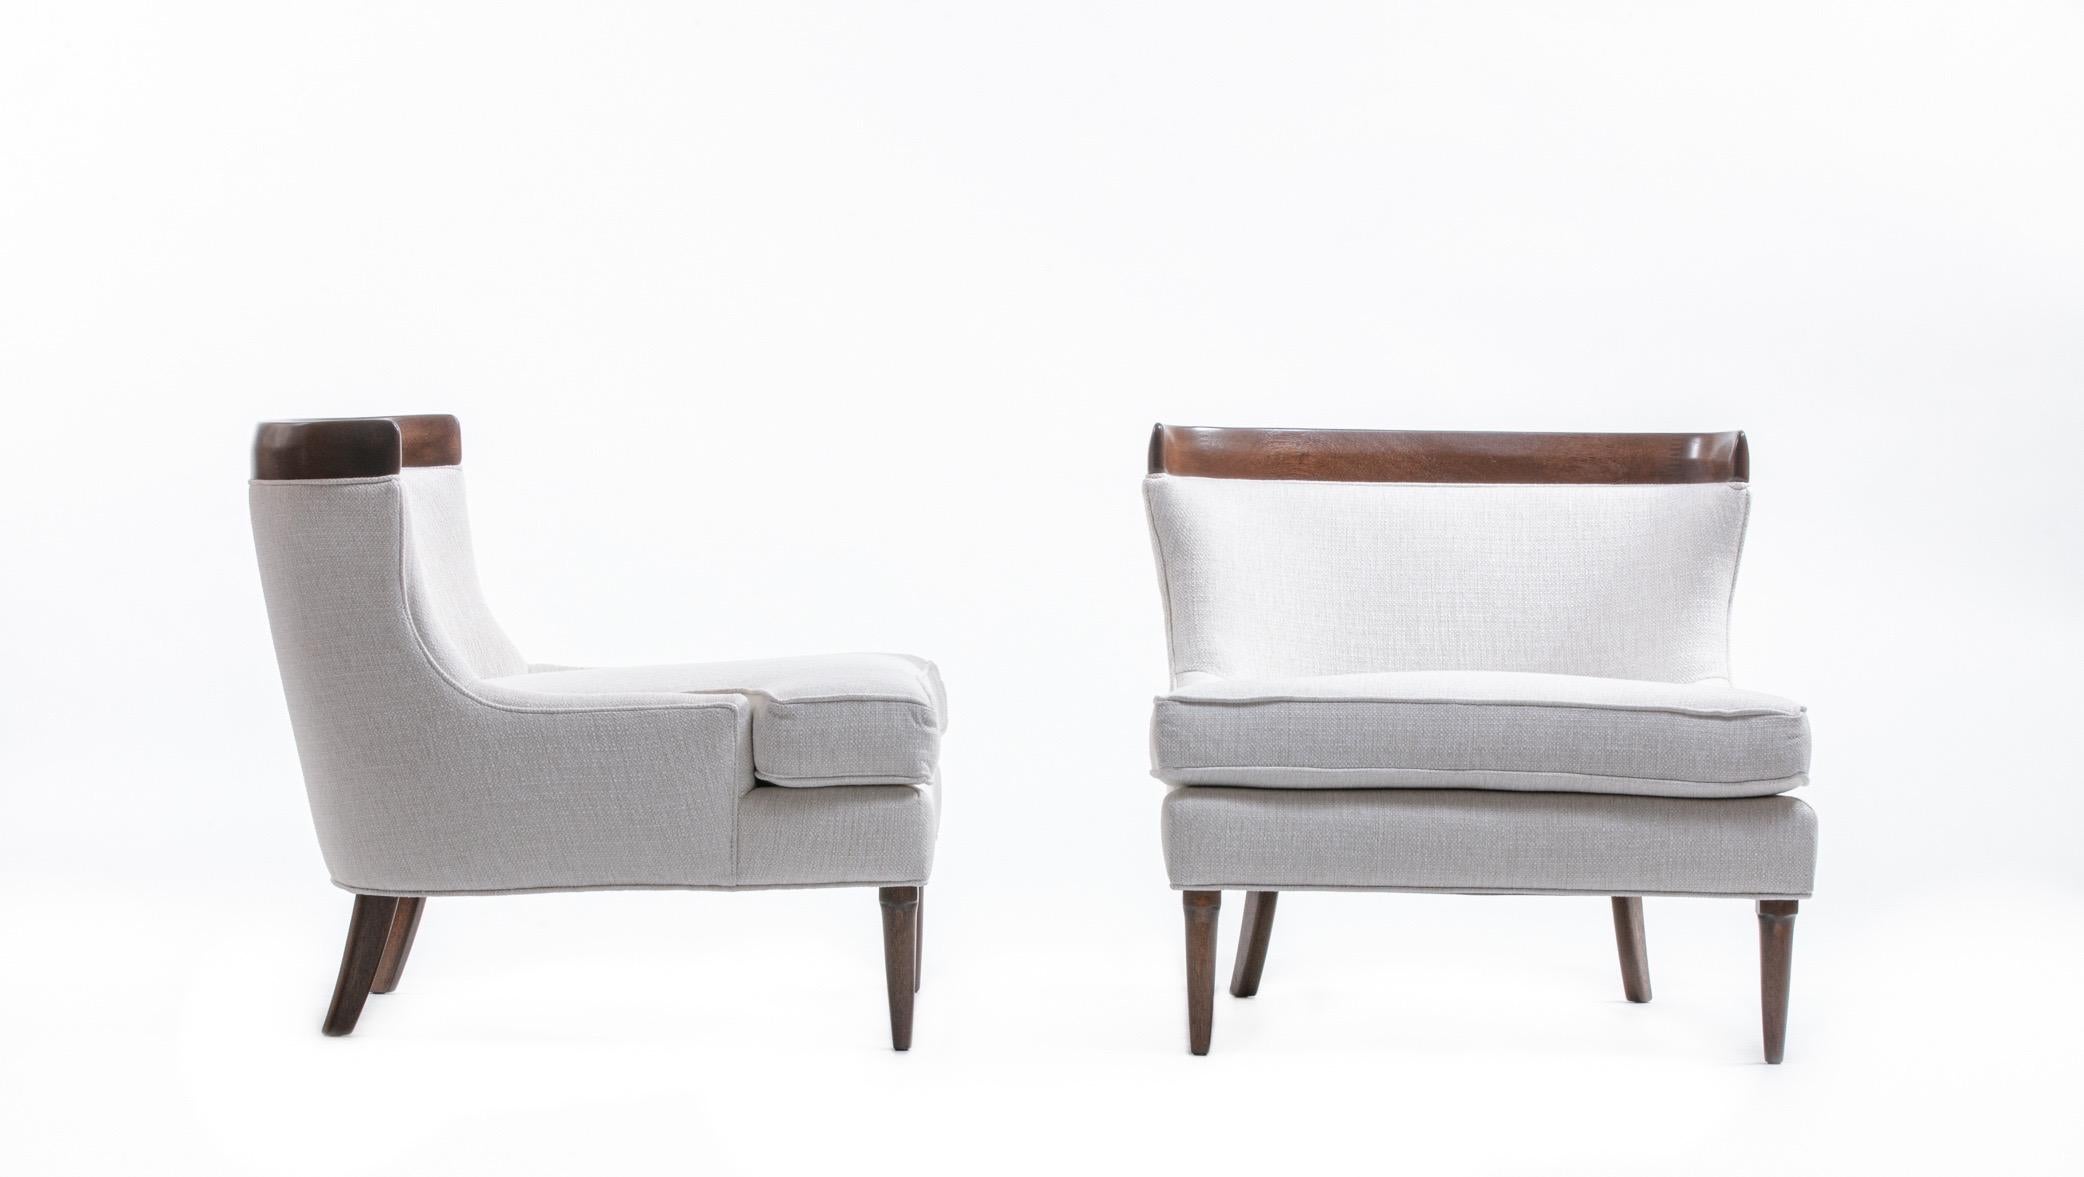 American Pair of Tomlinson Sophisticate Slipper Chairs in Walnut with Ivory Woven Fabric